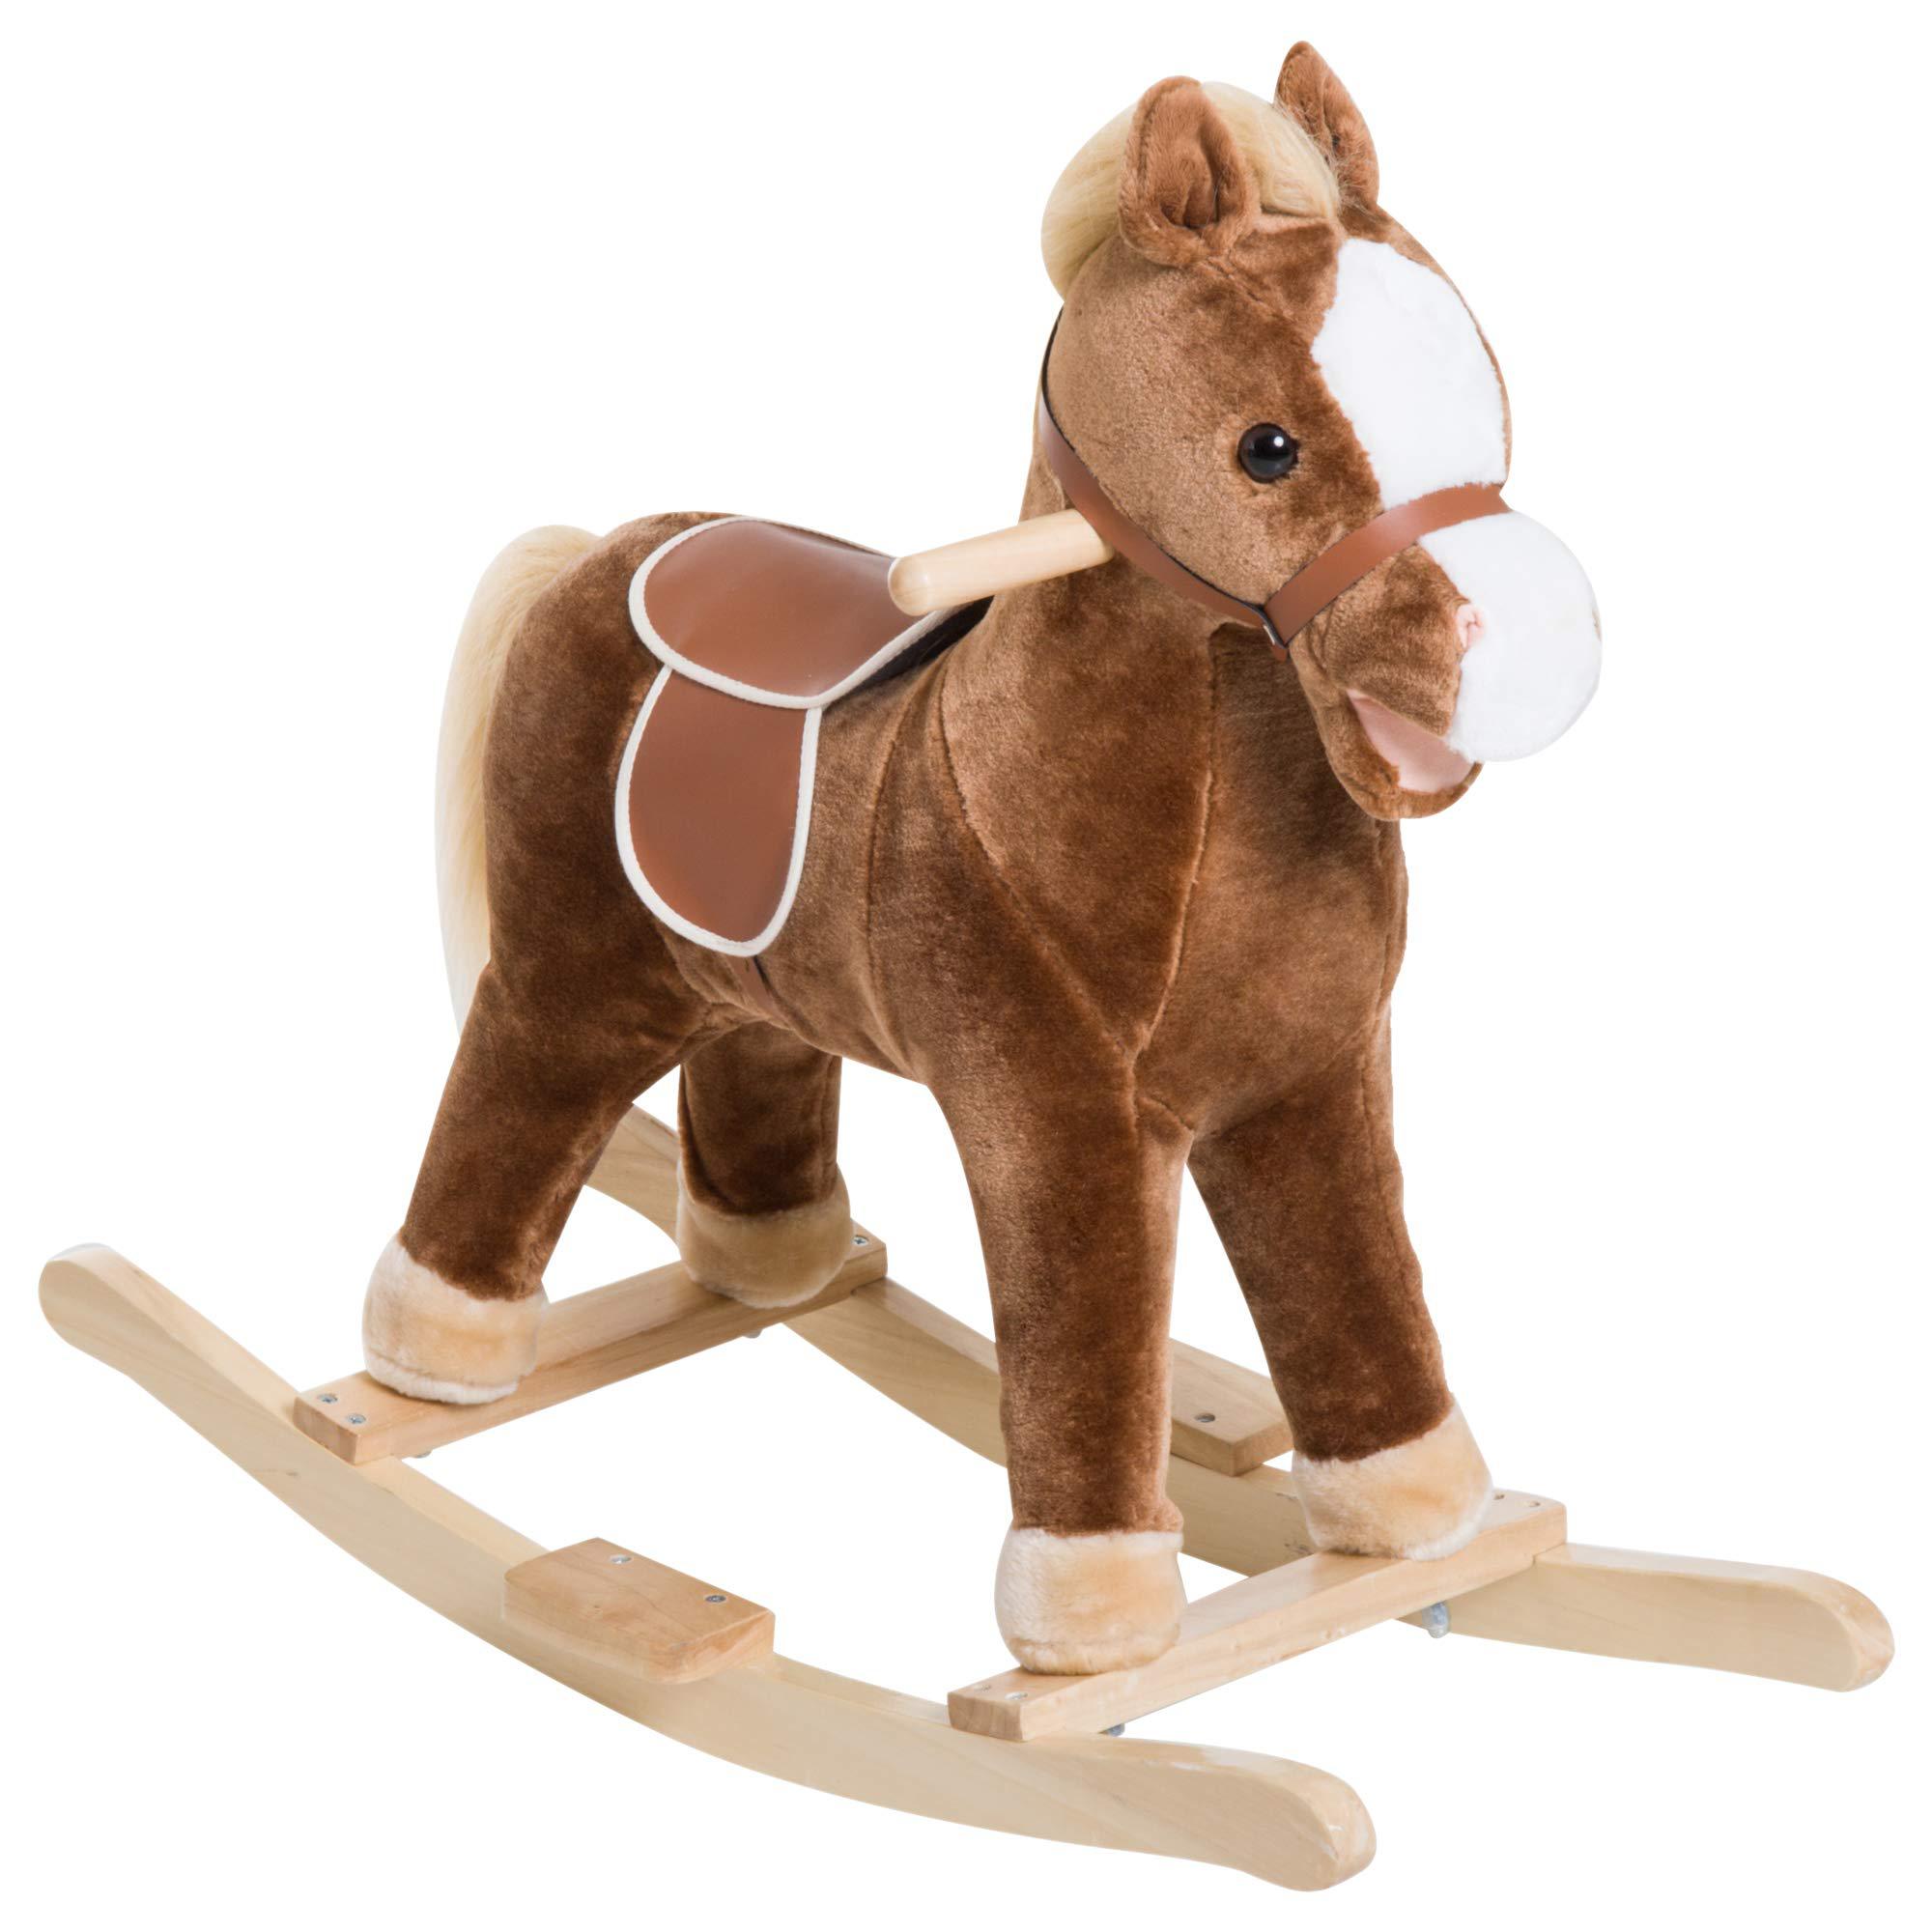 qaba kids plush toy rocking horse ride on with realistic sounds - brown